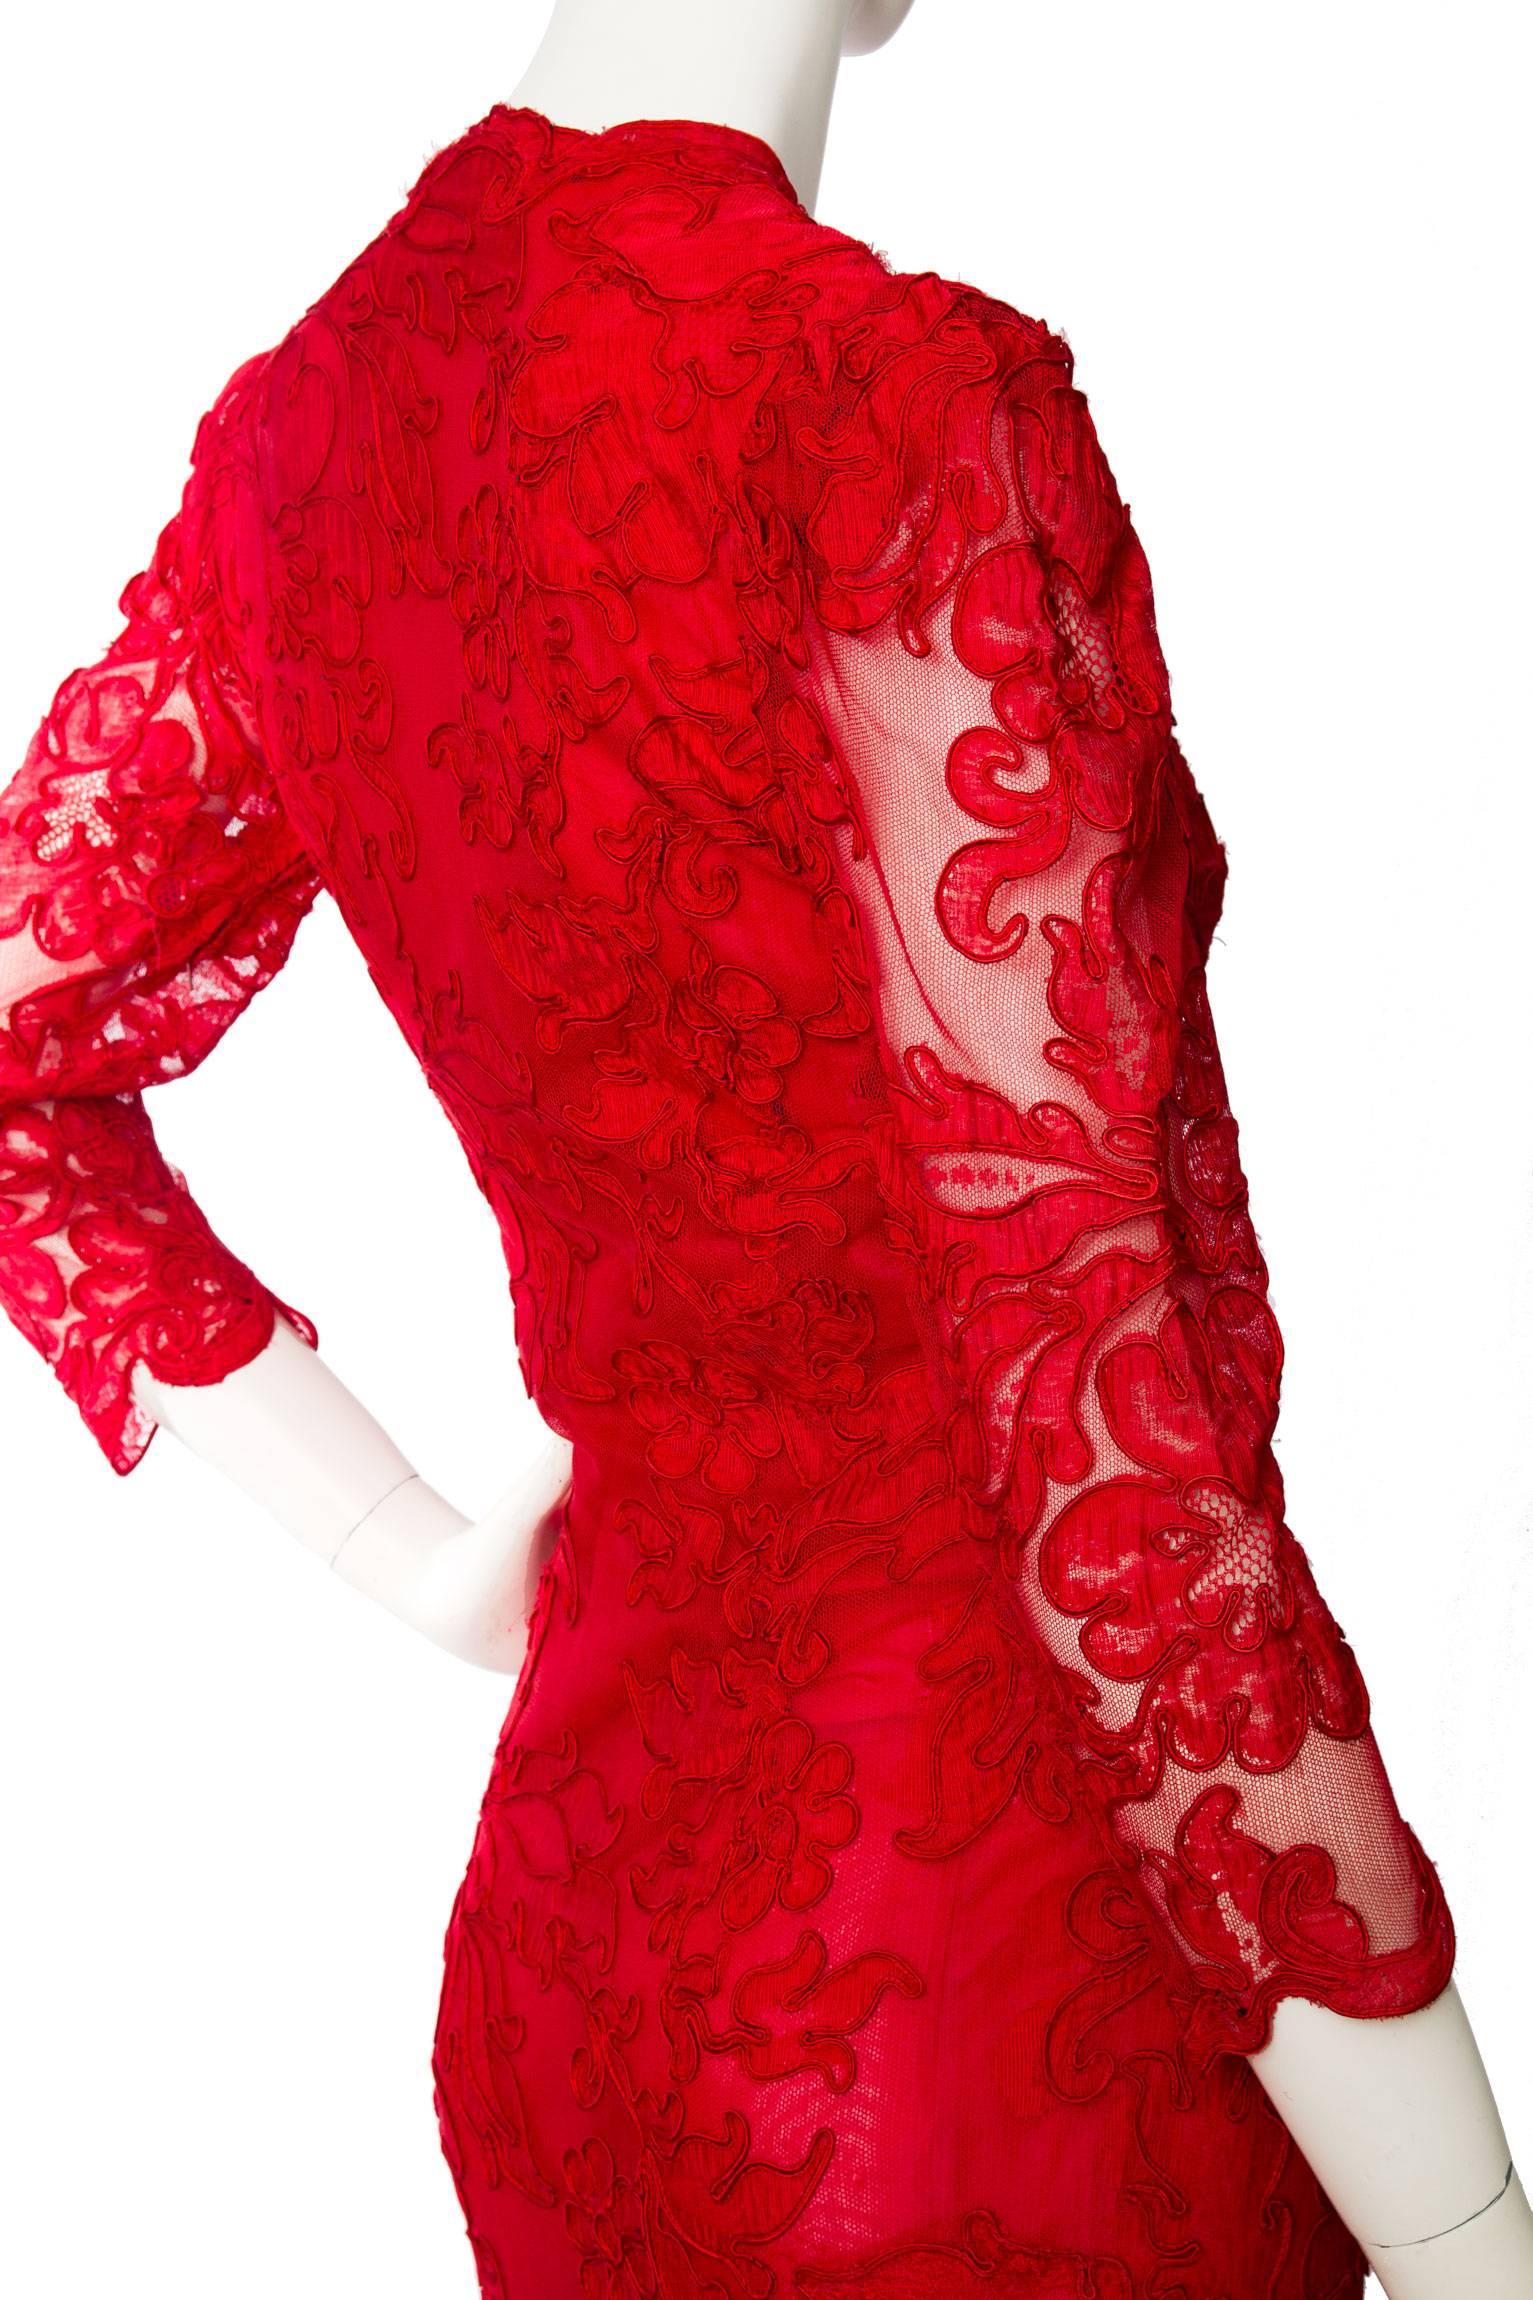 1983 Yves Saint Laurent Bright Red Haute Couture Evening Gown In Good Condition For Sale In Copenhagen, DK